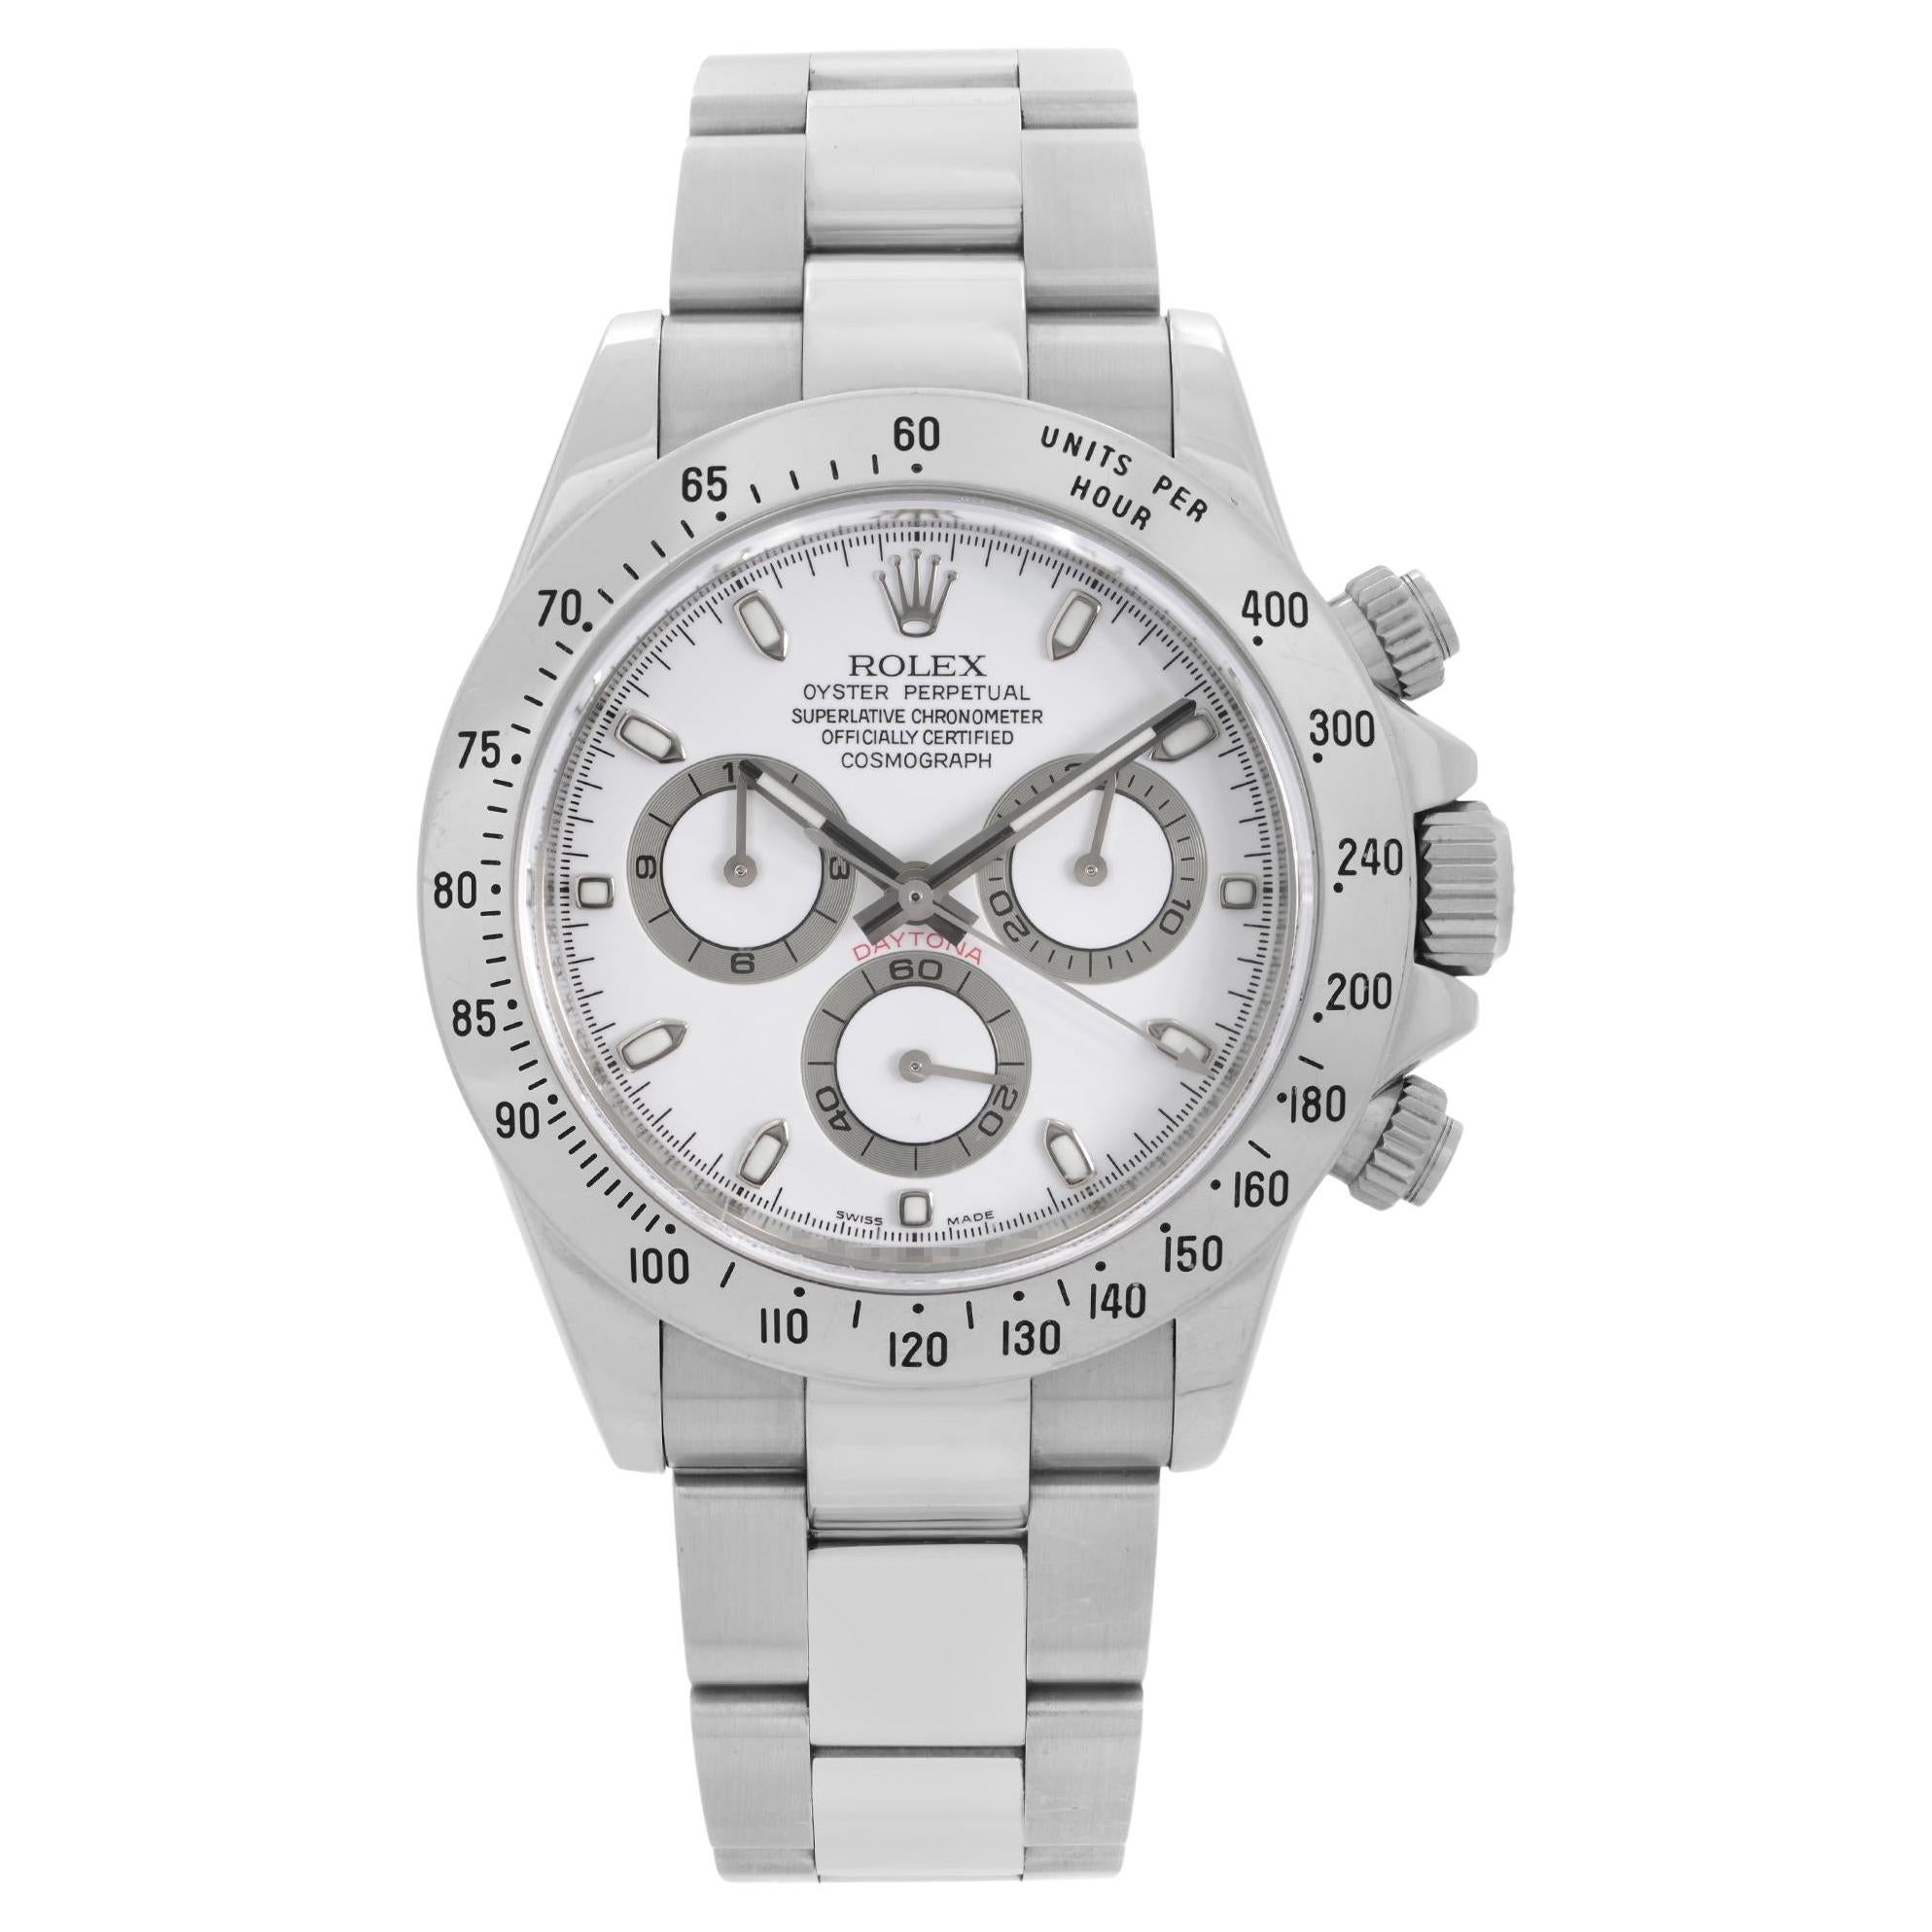 Rolex Daytona Cosmograph Stainless Steel White Dial Automatic Men Watch 116520